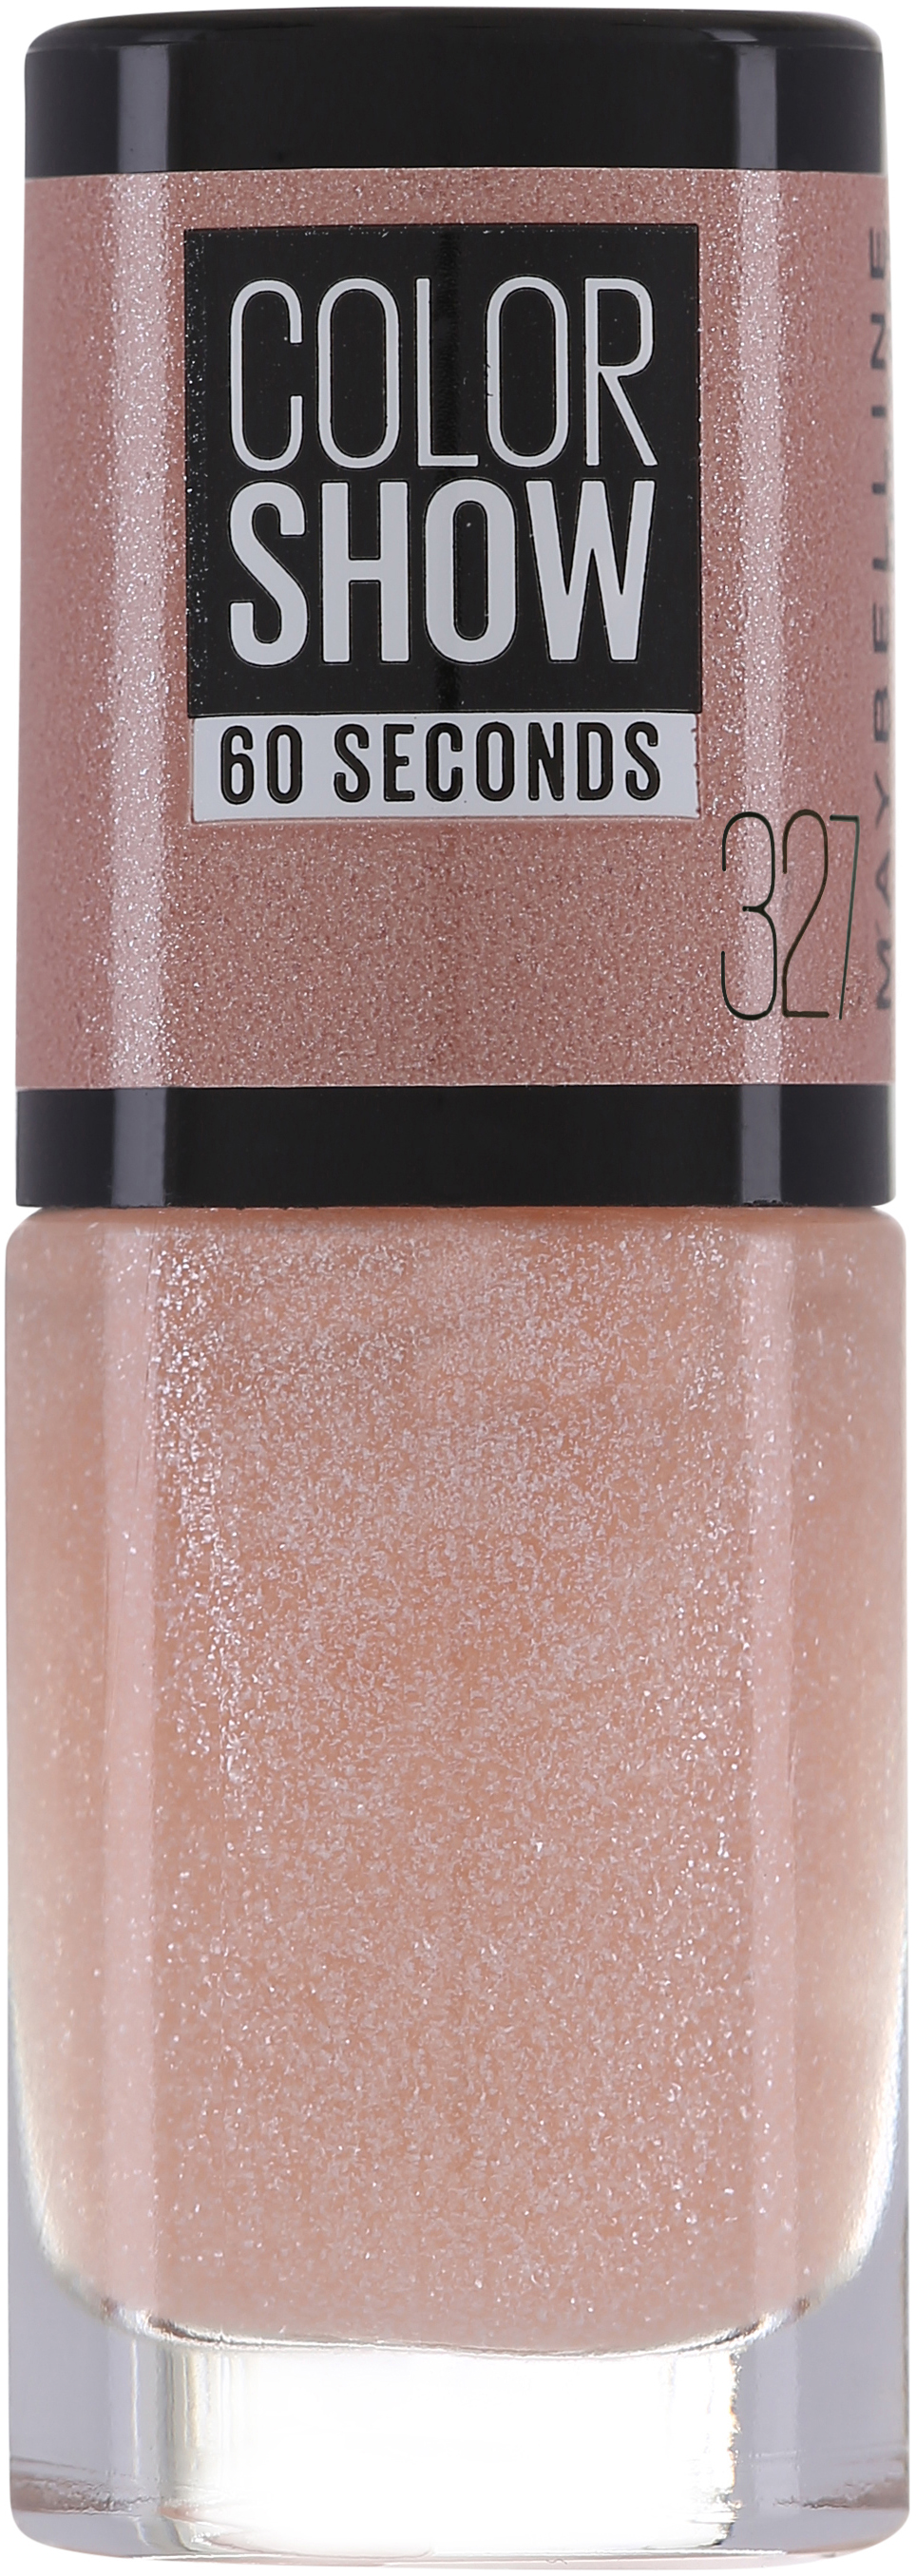 Maybelline Color Show 60 Seconds Nail Polish 46 Sugar Crystals —  Beautynstyle